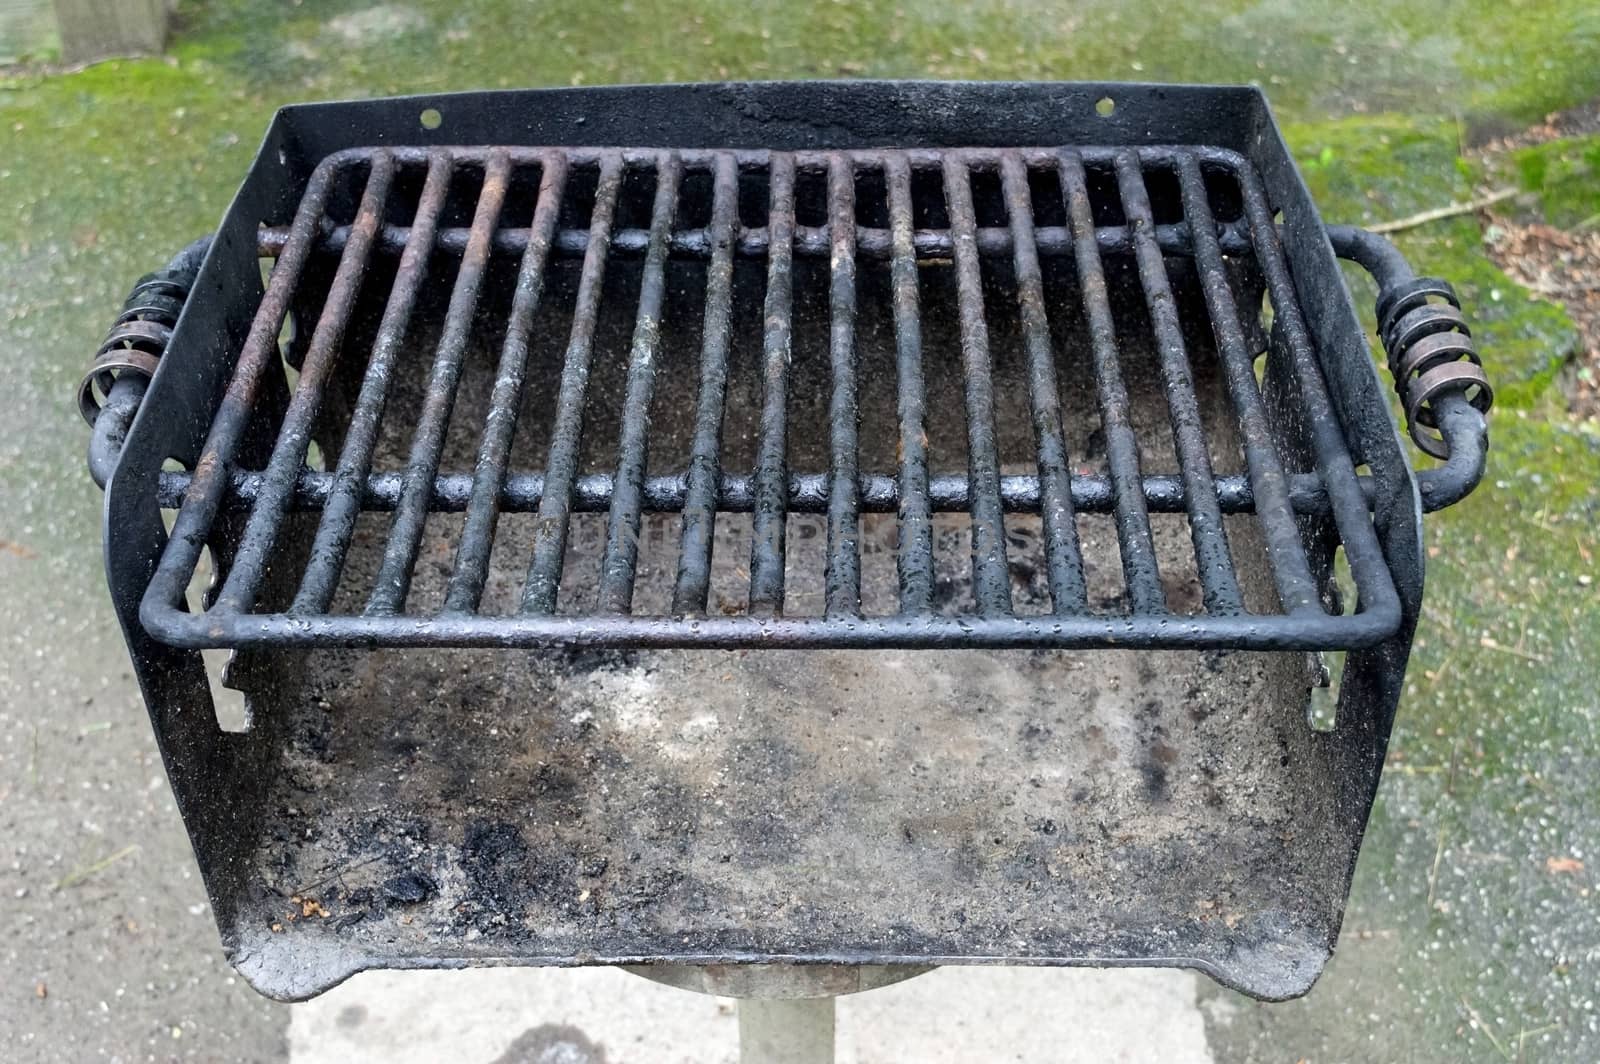 Well Used Grill Horizontal by stockbuster1